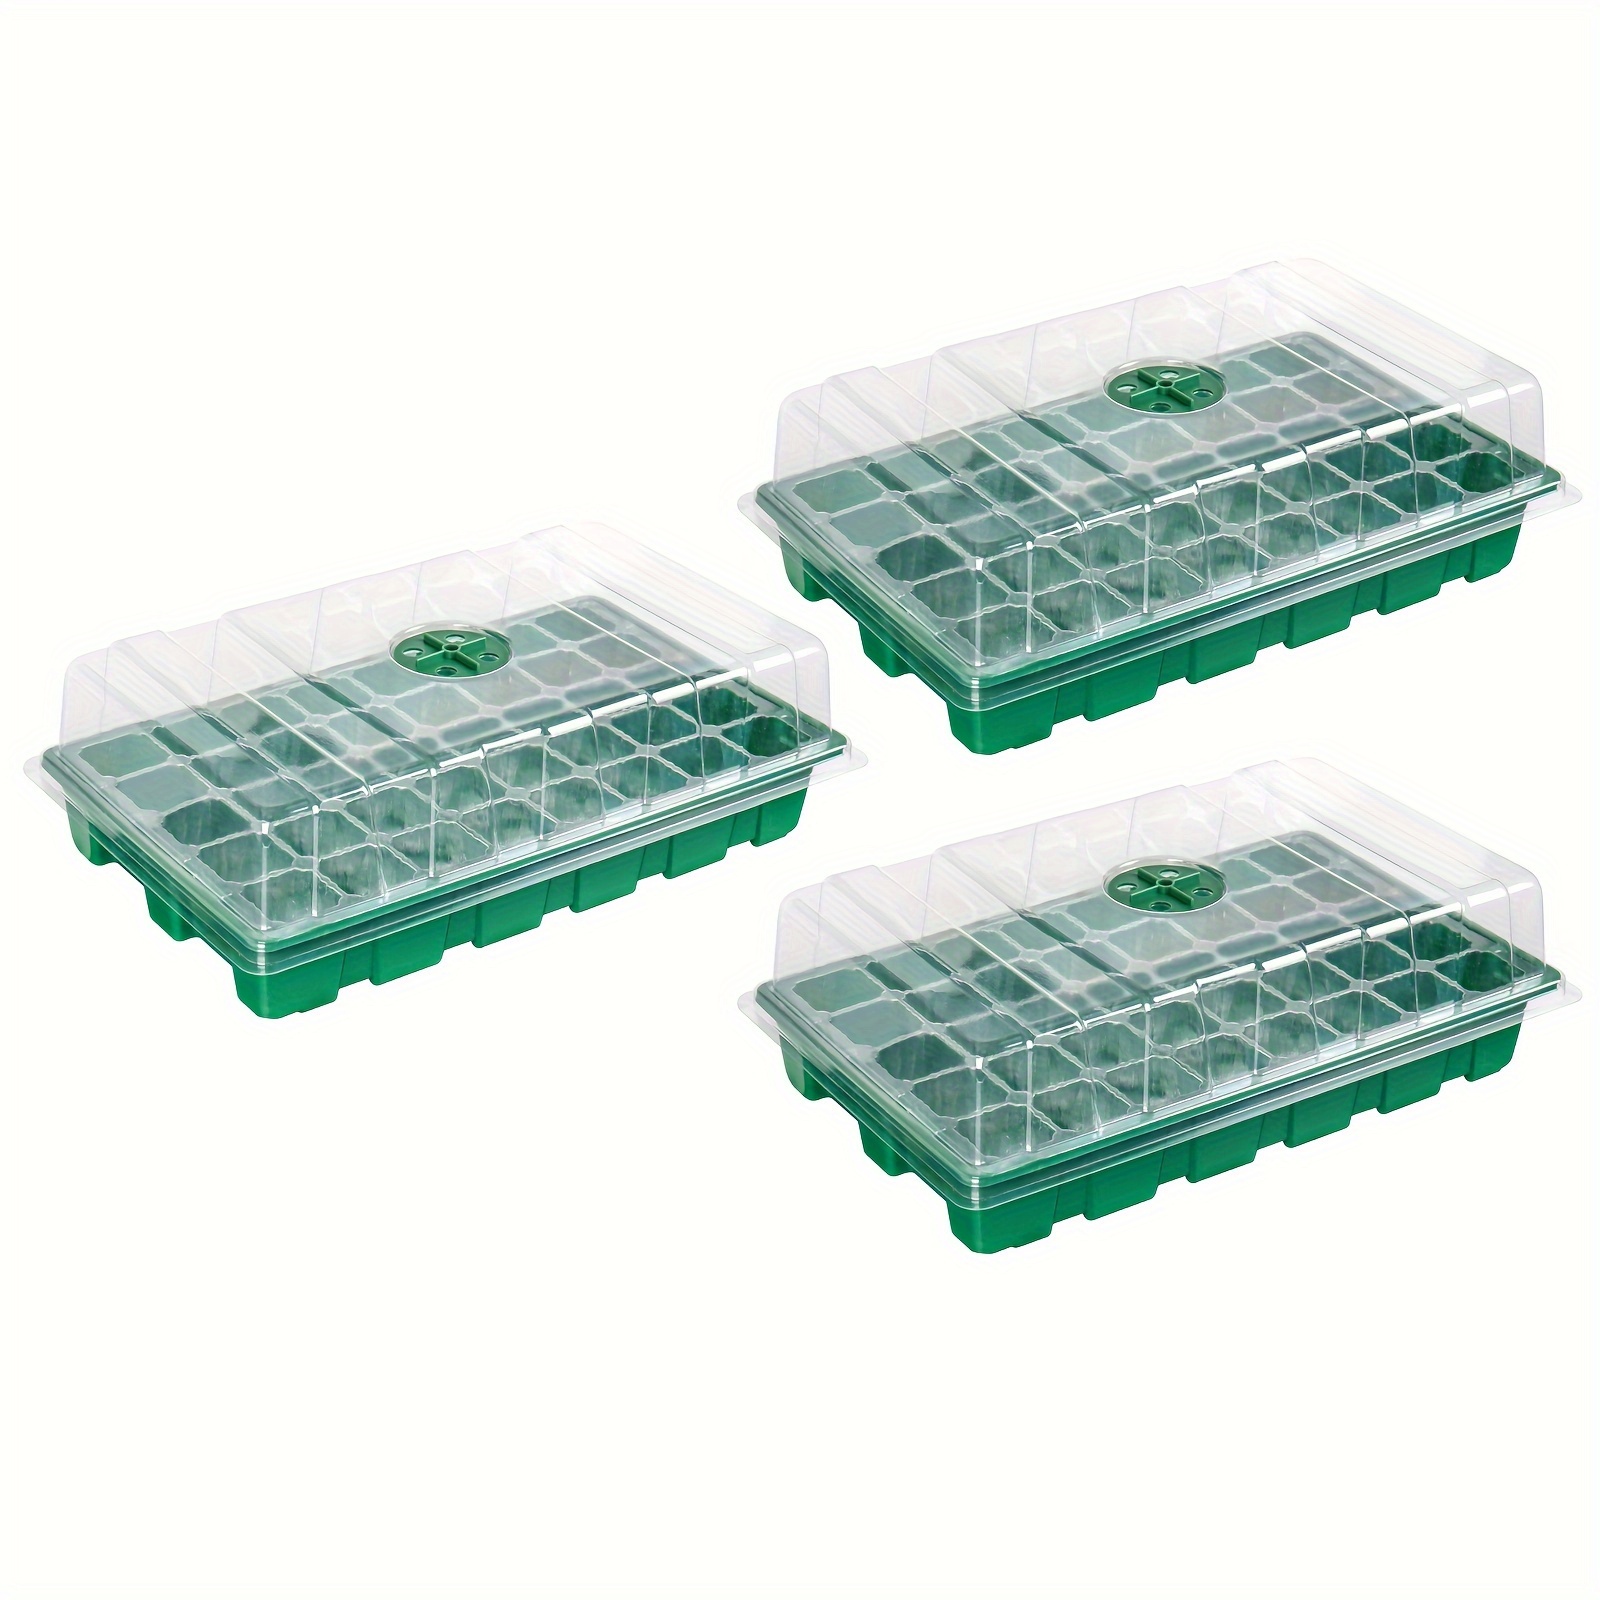 

3 Packs, Seedling Trays Seed Starter Tray, Mini Propagator Plant Greenhouse Grow Kit With Humidity Vented Domes And Base For Seeds' Starting (40 Cells Per Tray, Total 120 Cells), Green